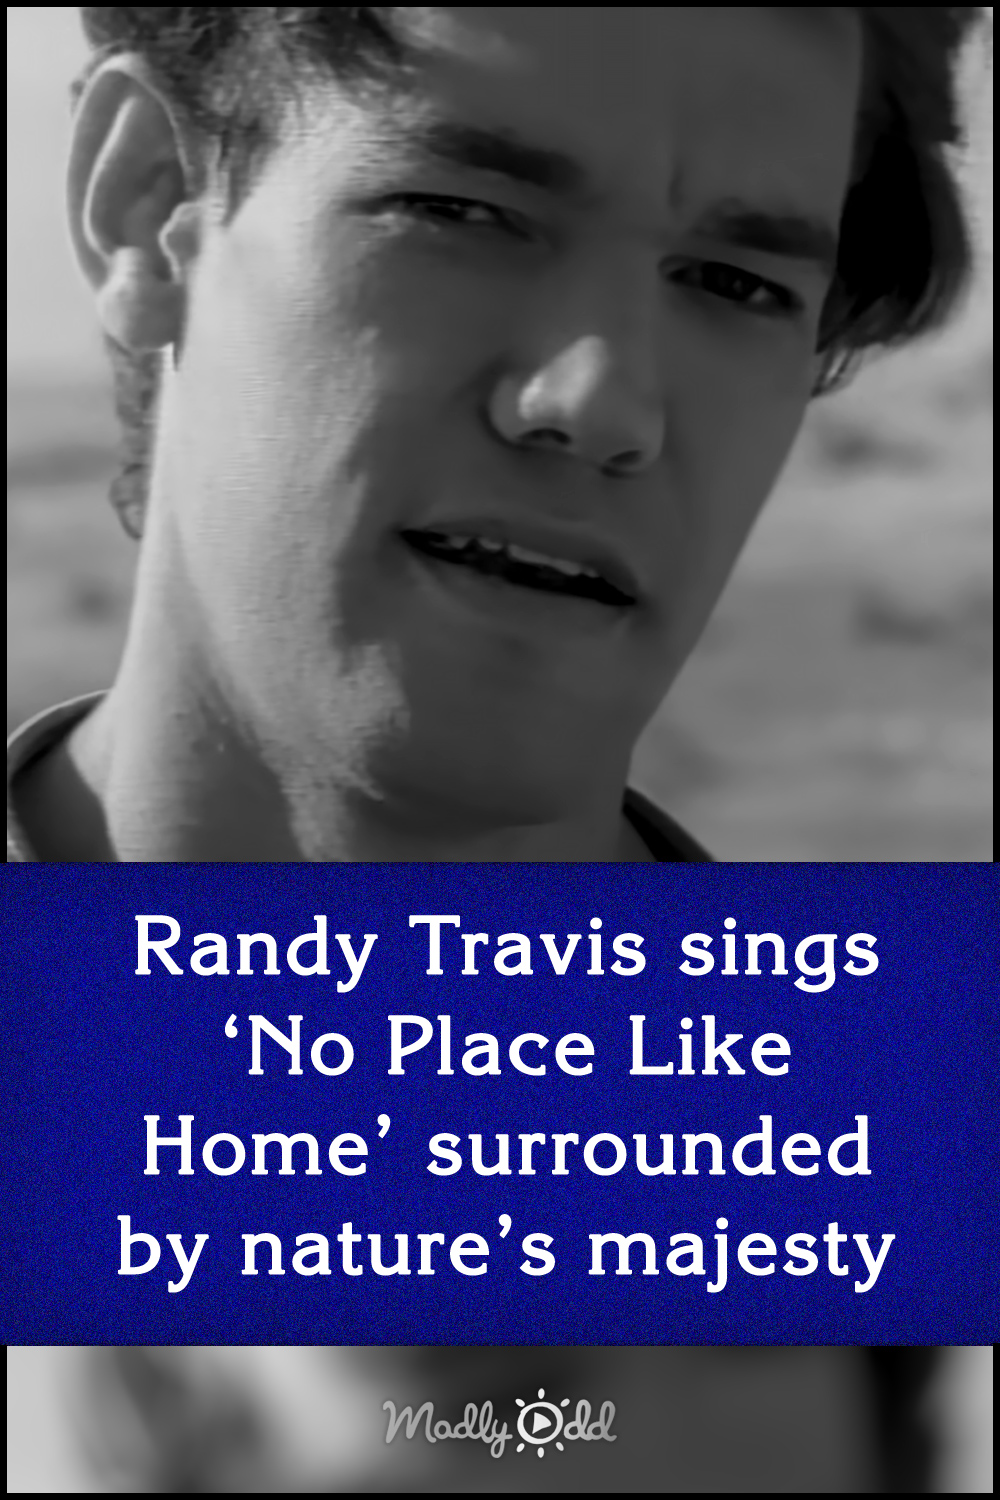 Randy Travis sings ‘No Place Like Home’ surrounded by nature’s majesty